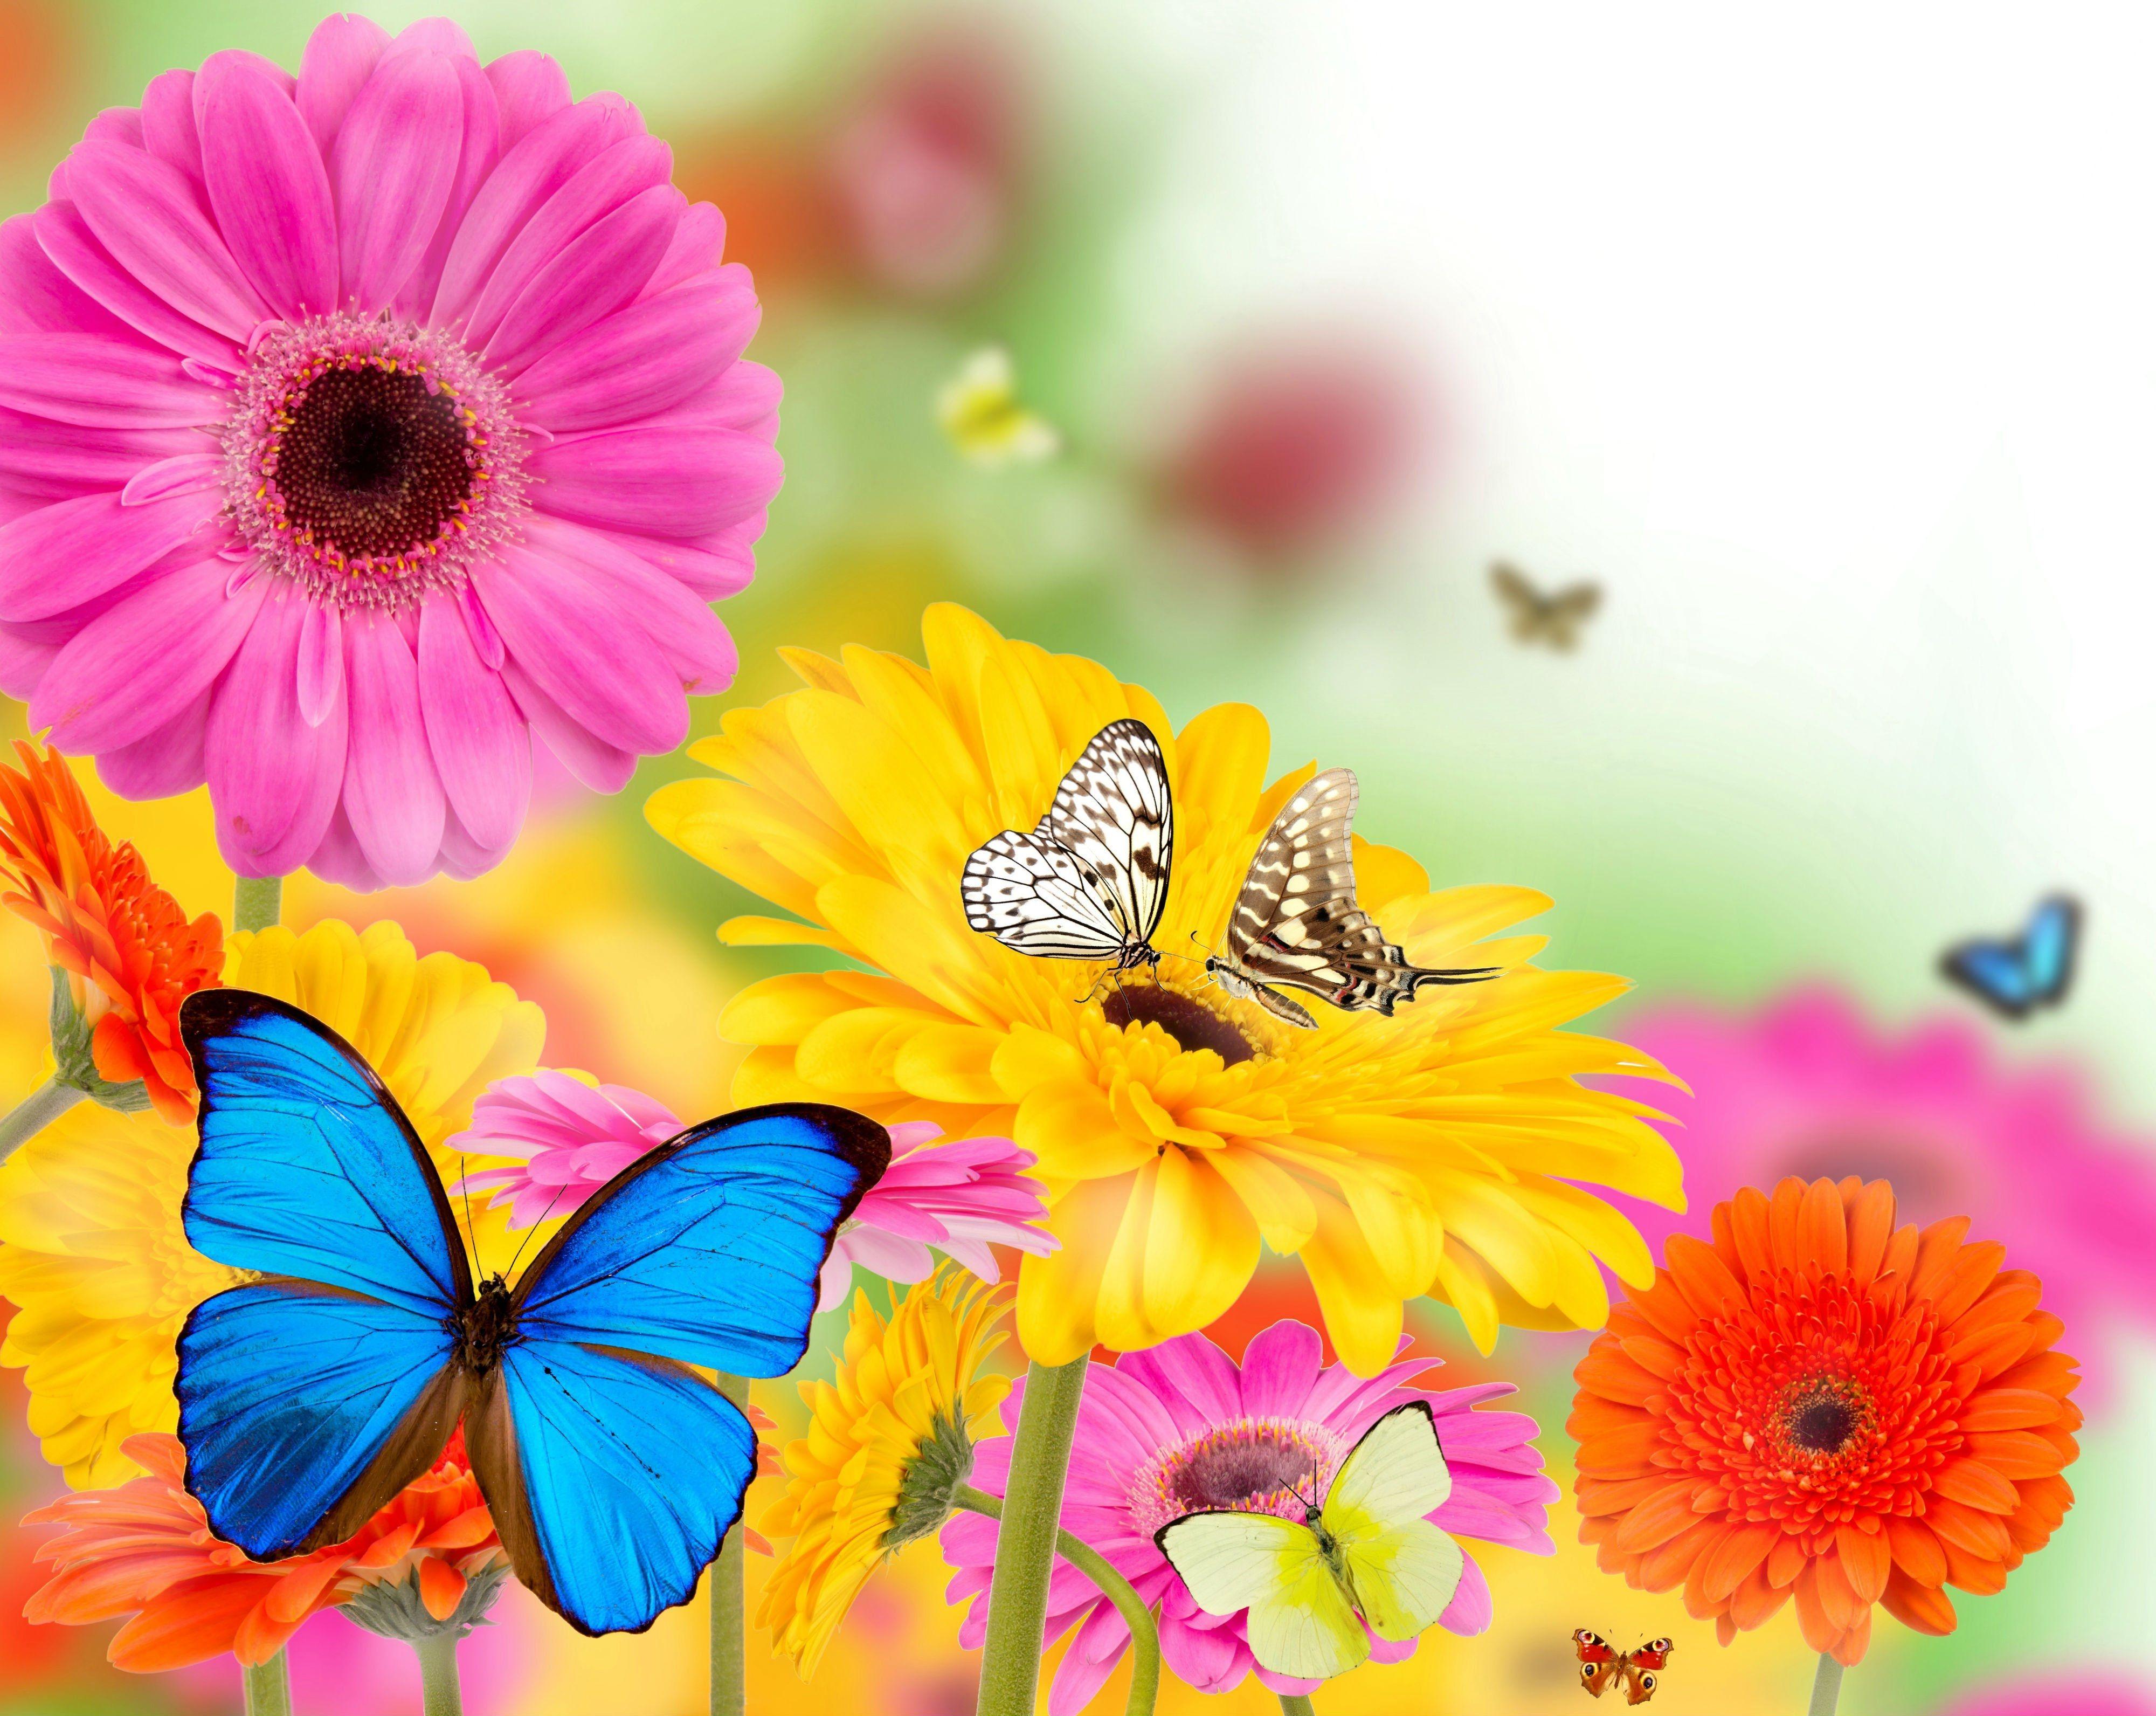 Spring Butterfly Wallpaper High Definition On Wallpaper 1080p HD